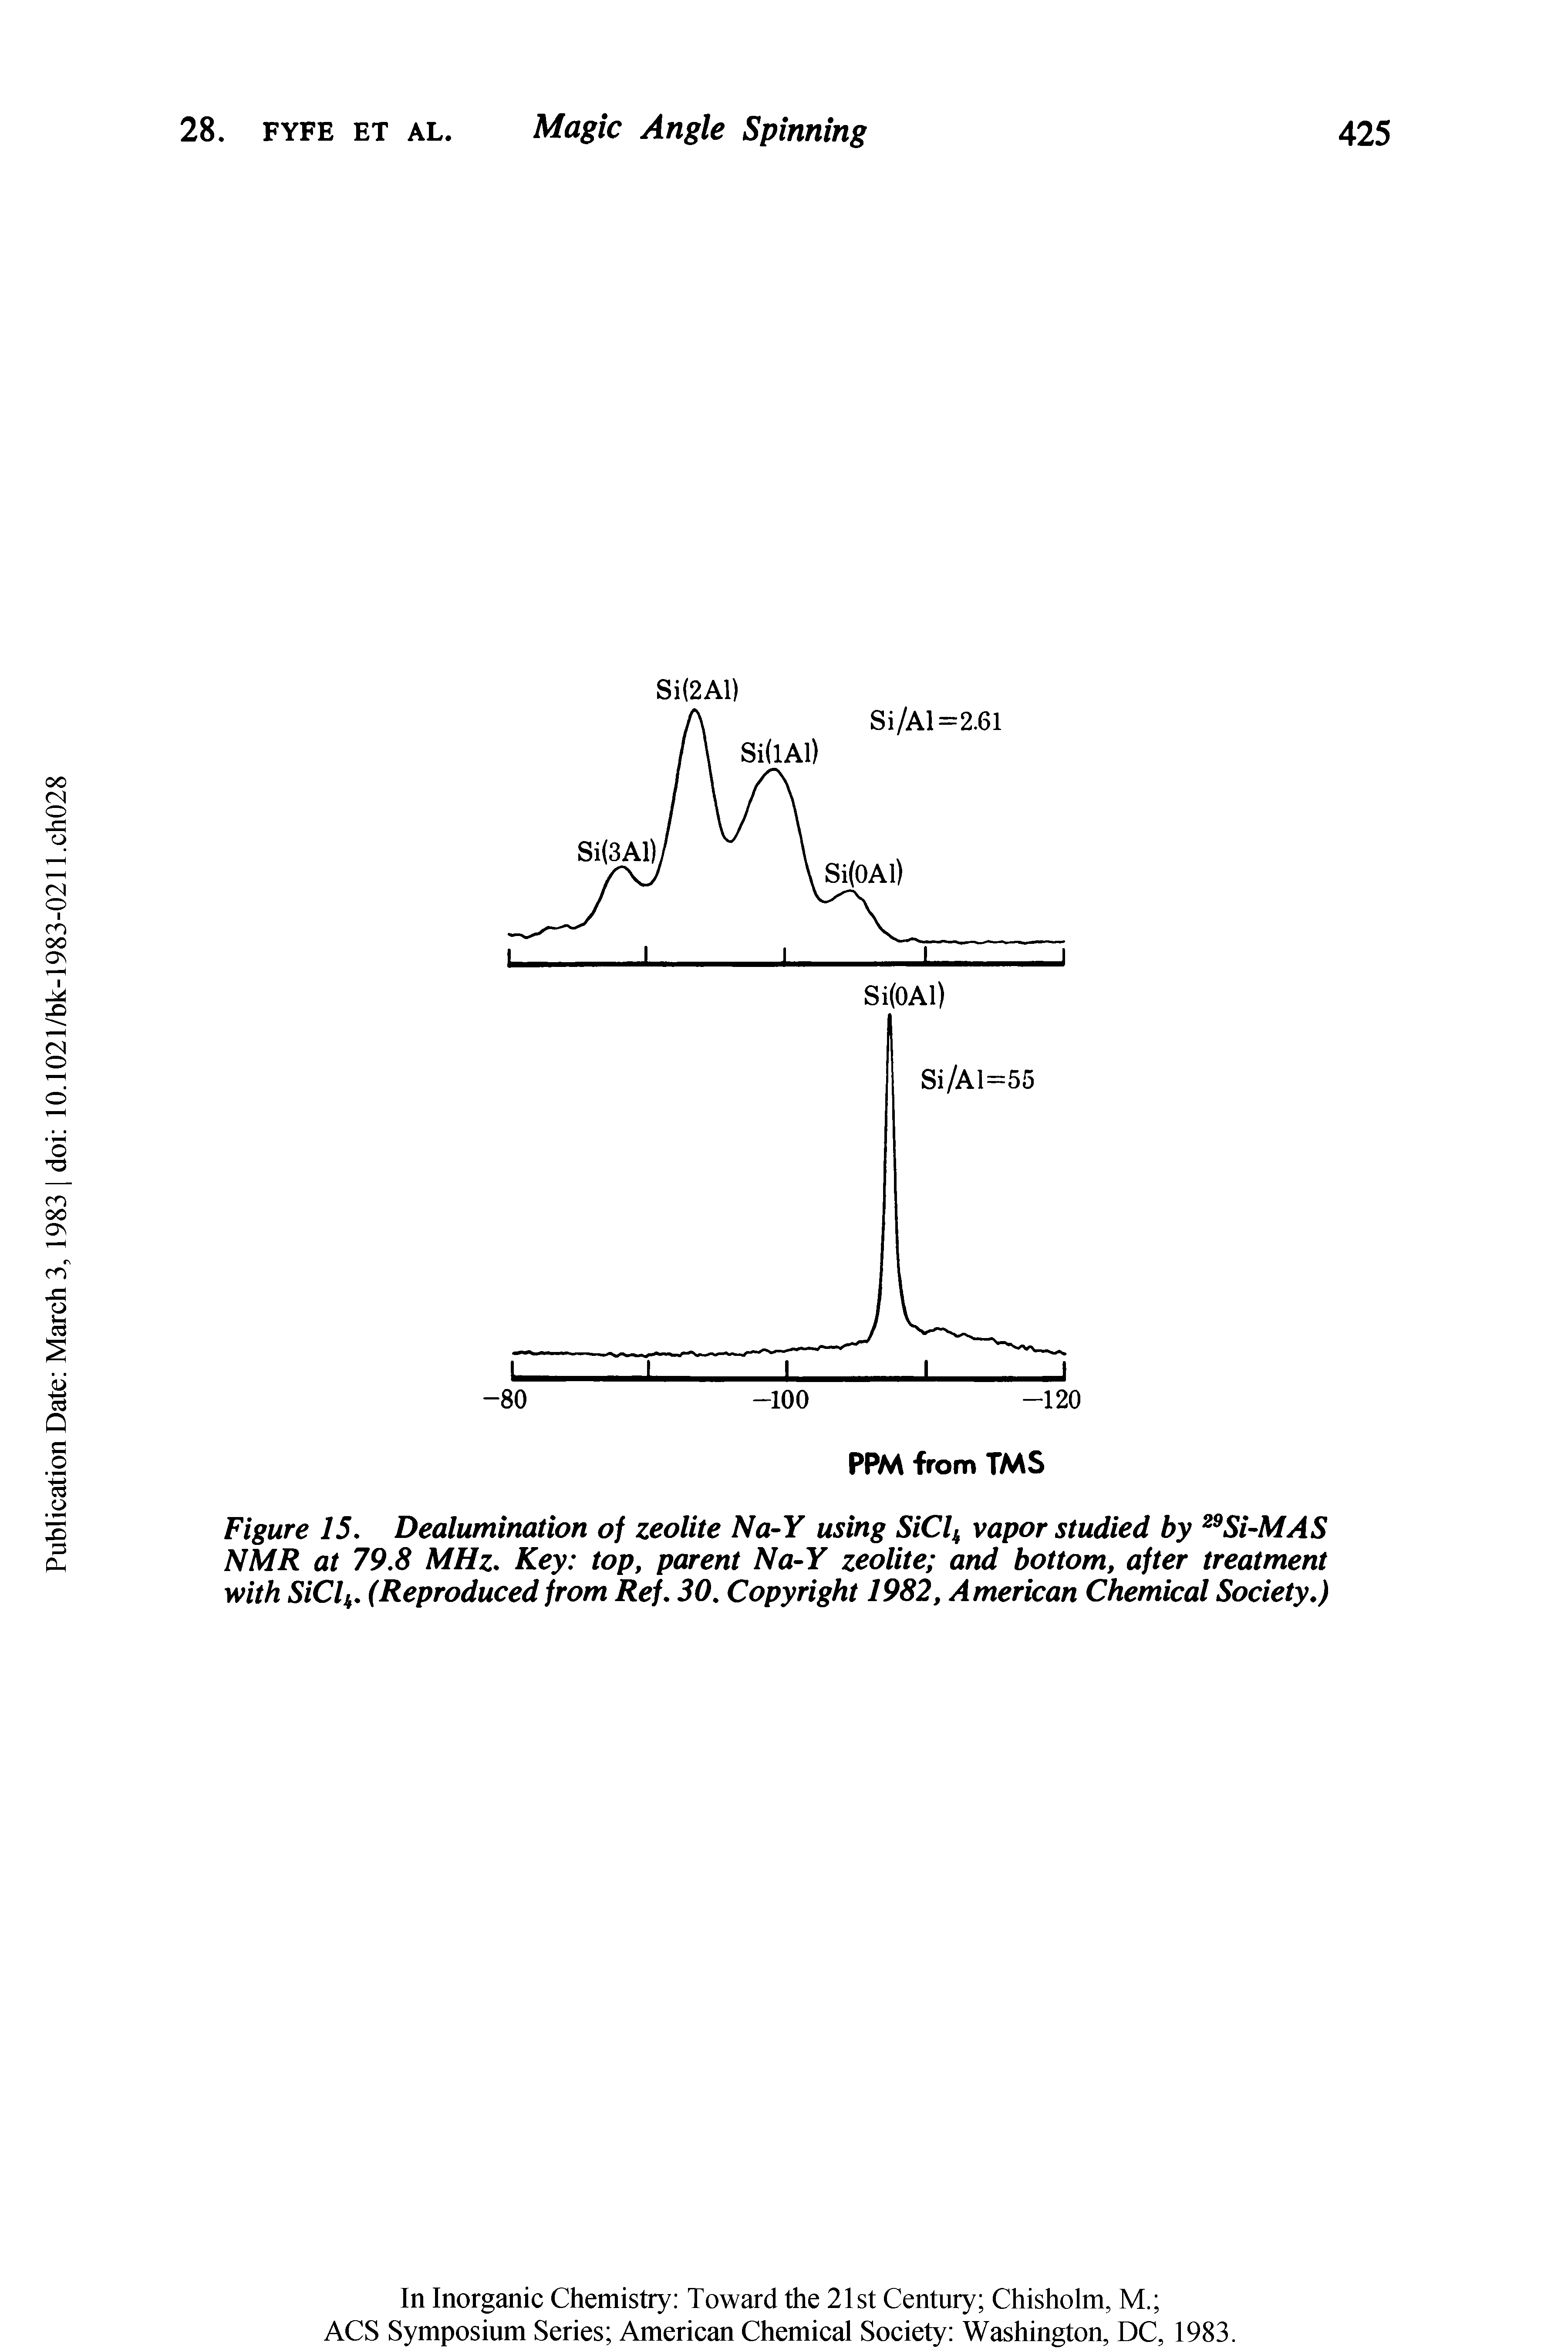 Figure 15, Dealumination of zeolite Na-Y using SiClk vapor studied by 29Si-MAS NMR at 79.8 MHz. Key top, parent Na-Y zeolite and bottom, after treatment with SiClk. (Reproduced from Ref. 30. Copyright 1982, American Chemical Society.)...